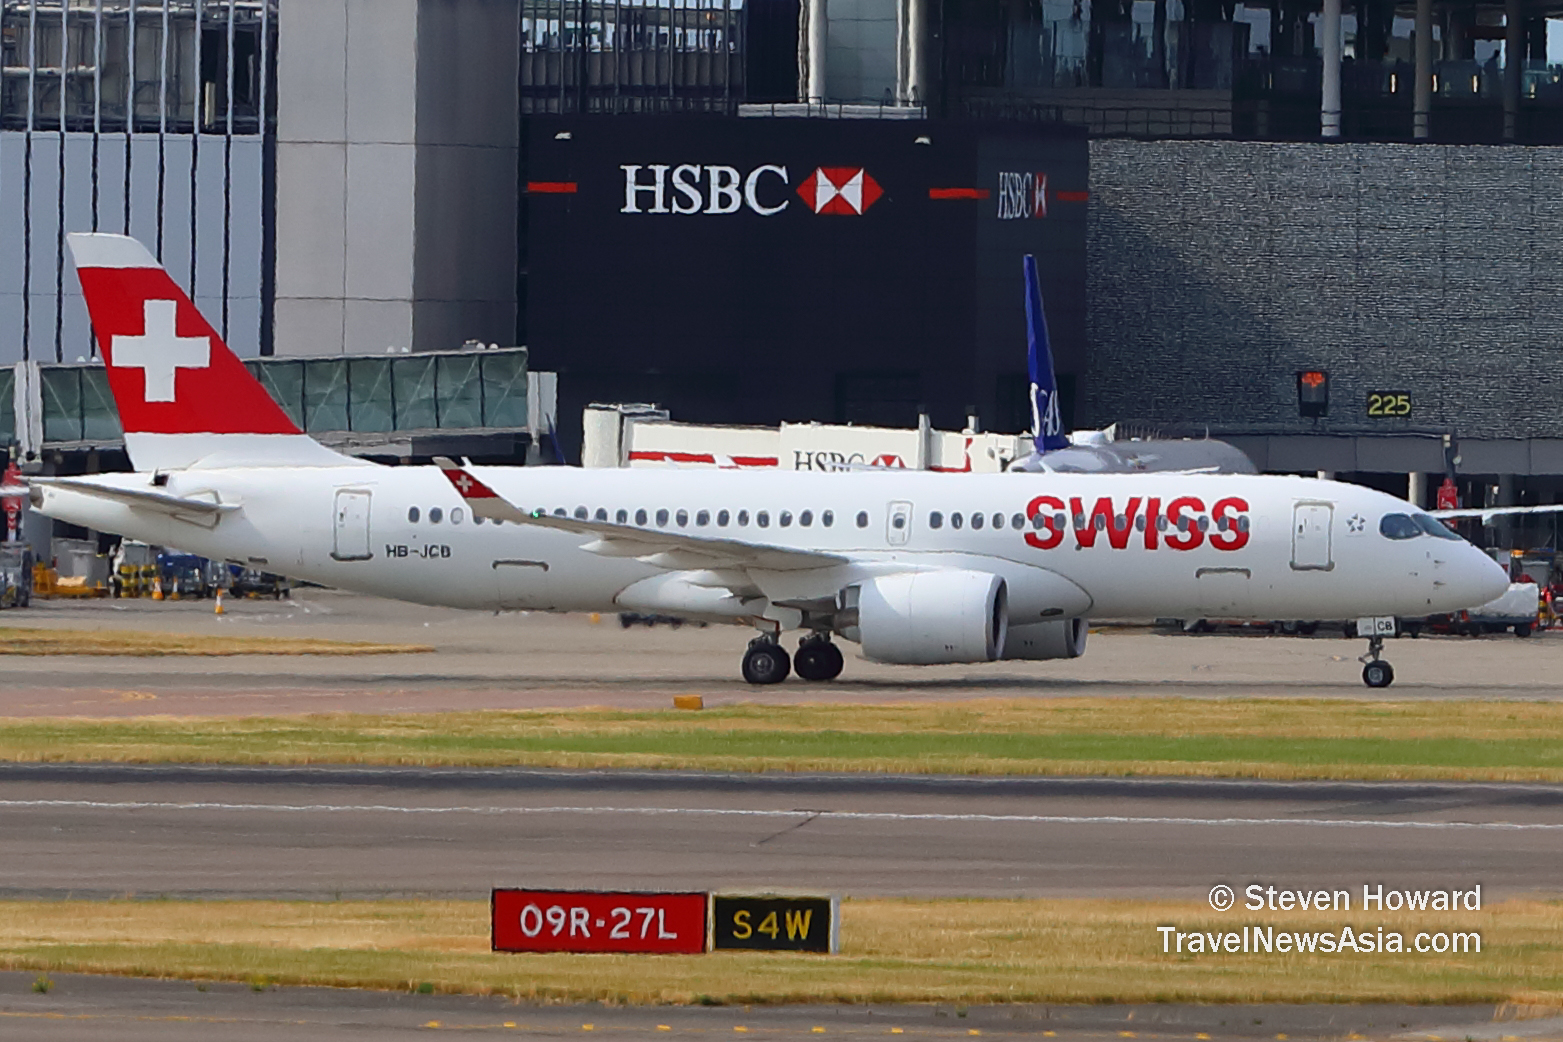 SWISS A220-300 reg: HB-JCB at LHR. Picture by Steven Howard of TravelNewsAsia.com. Click to enlarge.